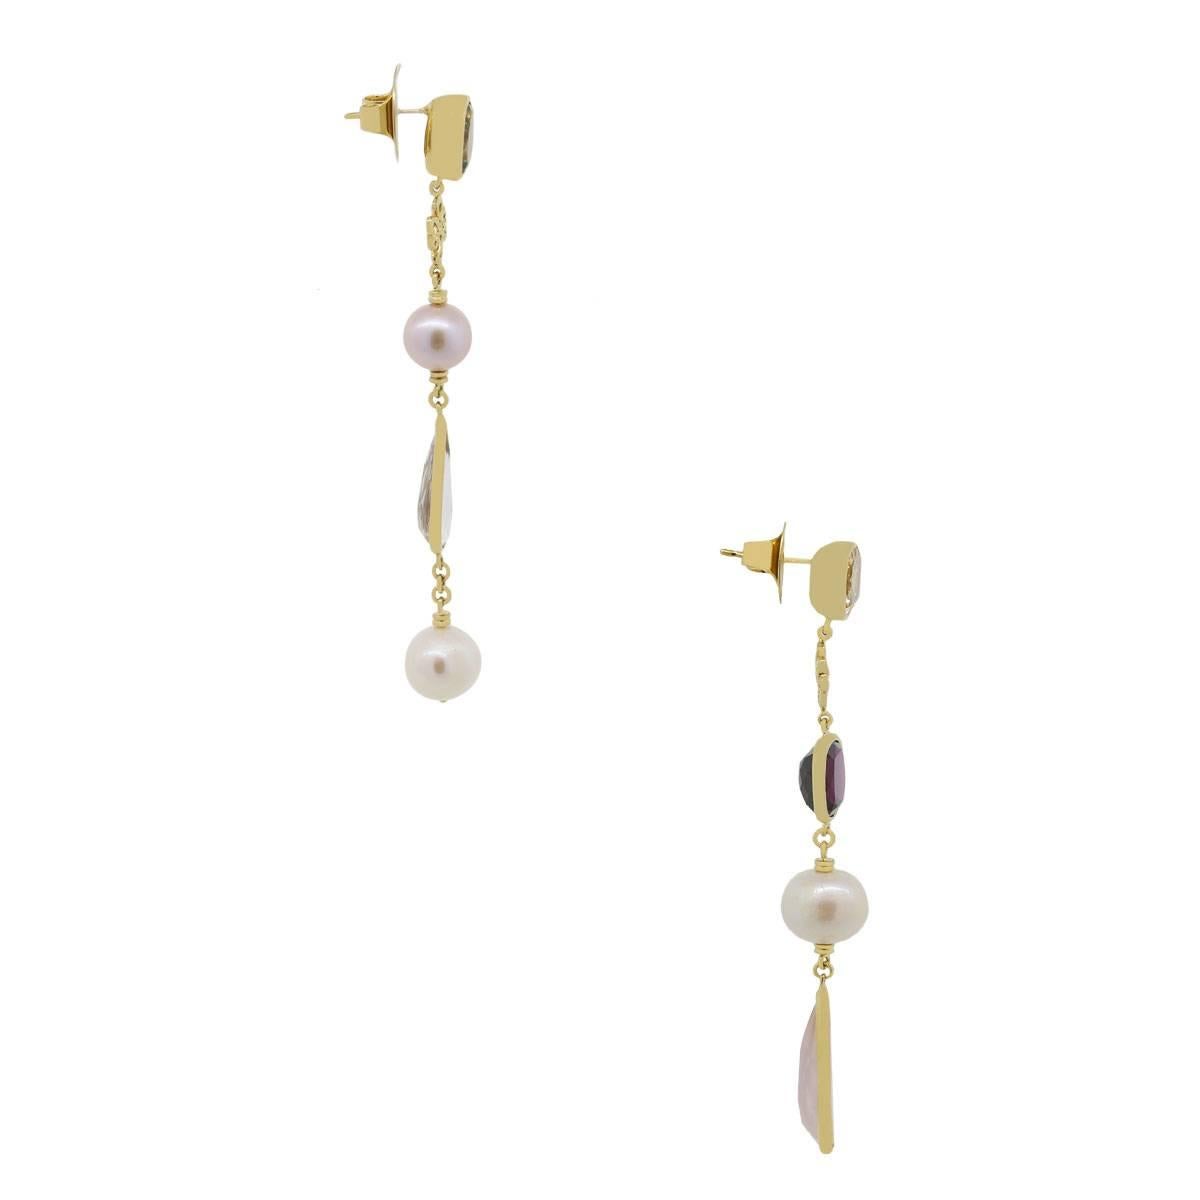 Designer: H. Stern
Style: 18k yellow gold
Gemstone Details: Pearl, yellow citrine, pink tourmaline and rubellite gemstones
Measurements: 0.20″ x 0.35″ 3″
Closure: Post Friction
Total Weight: 14.5g (9.3dwt)
SKU: G7205